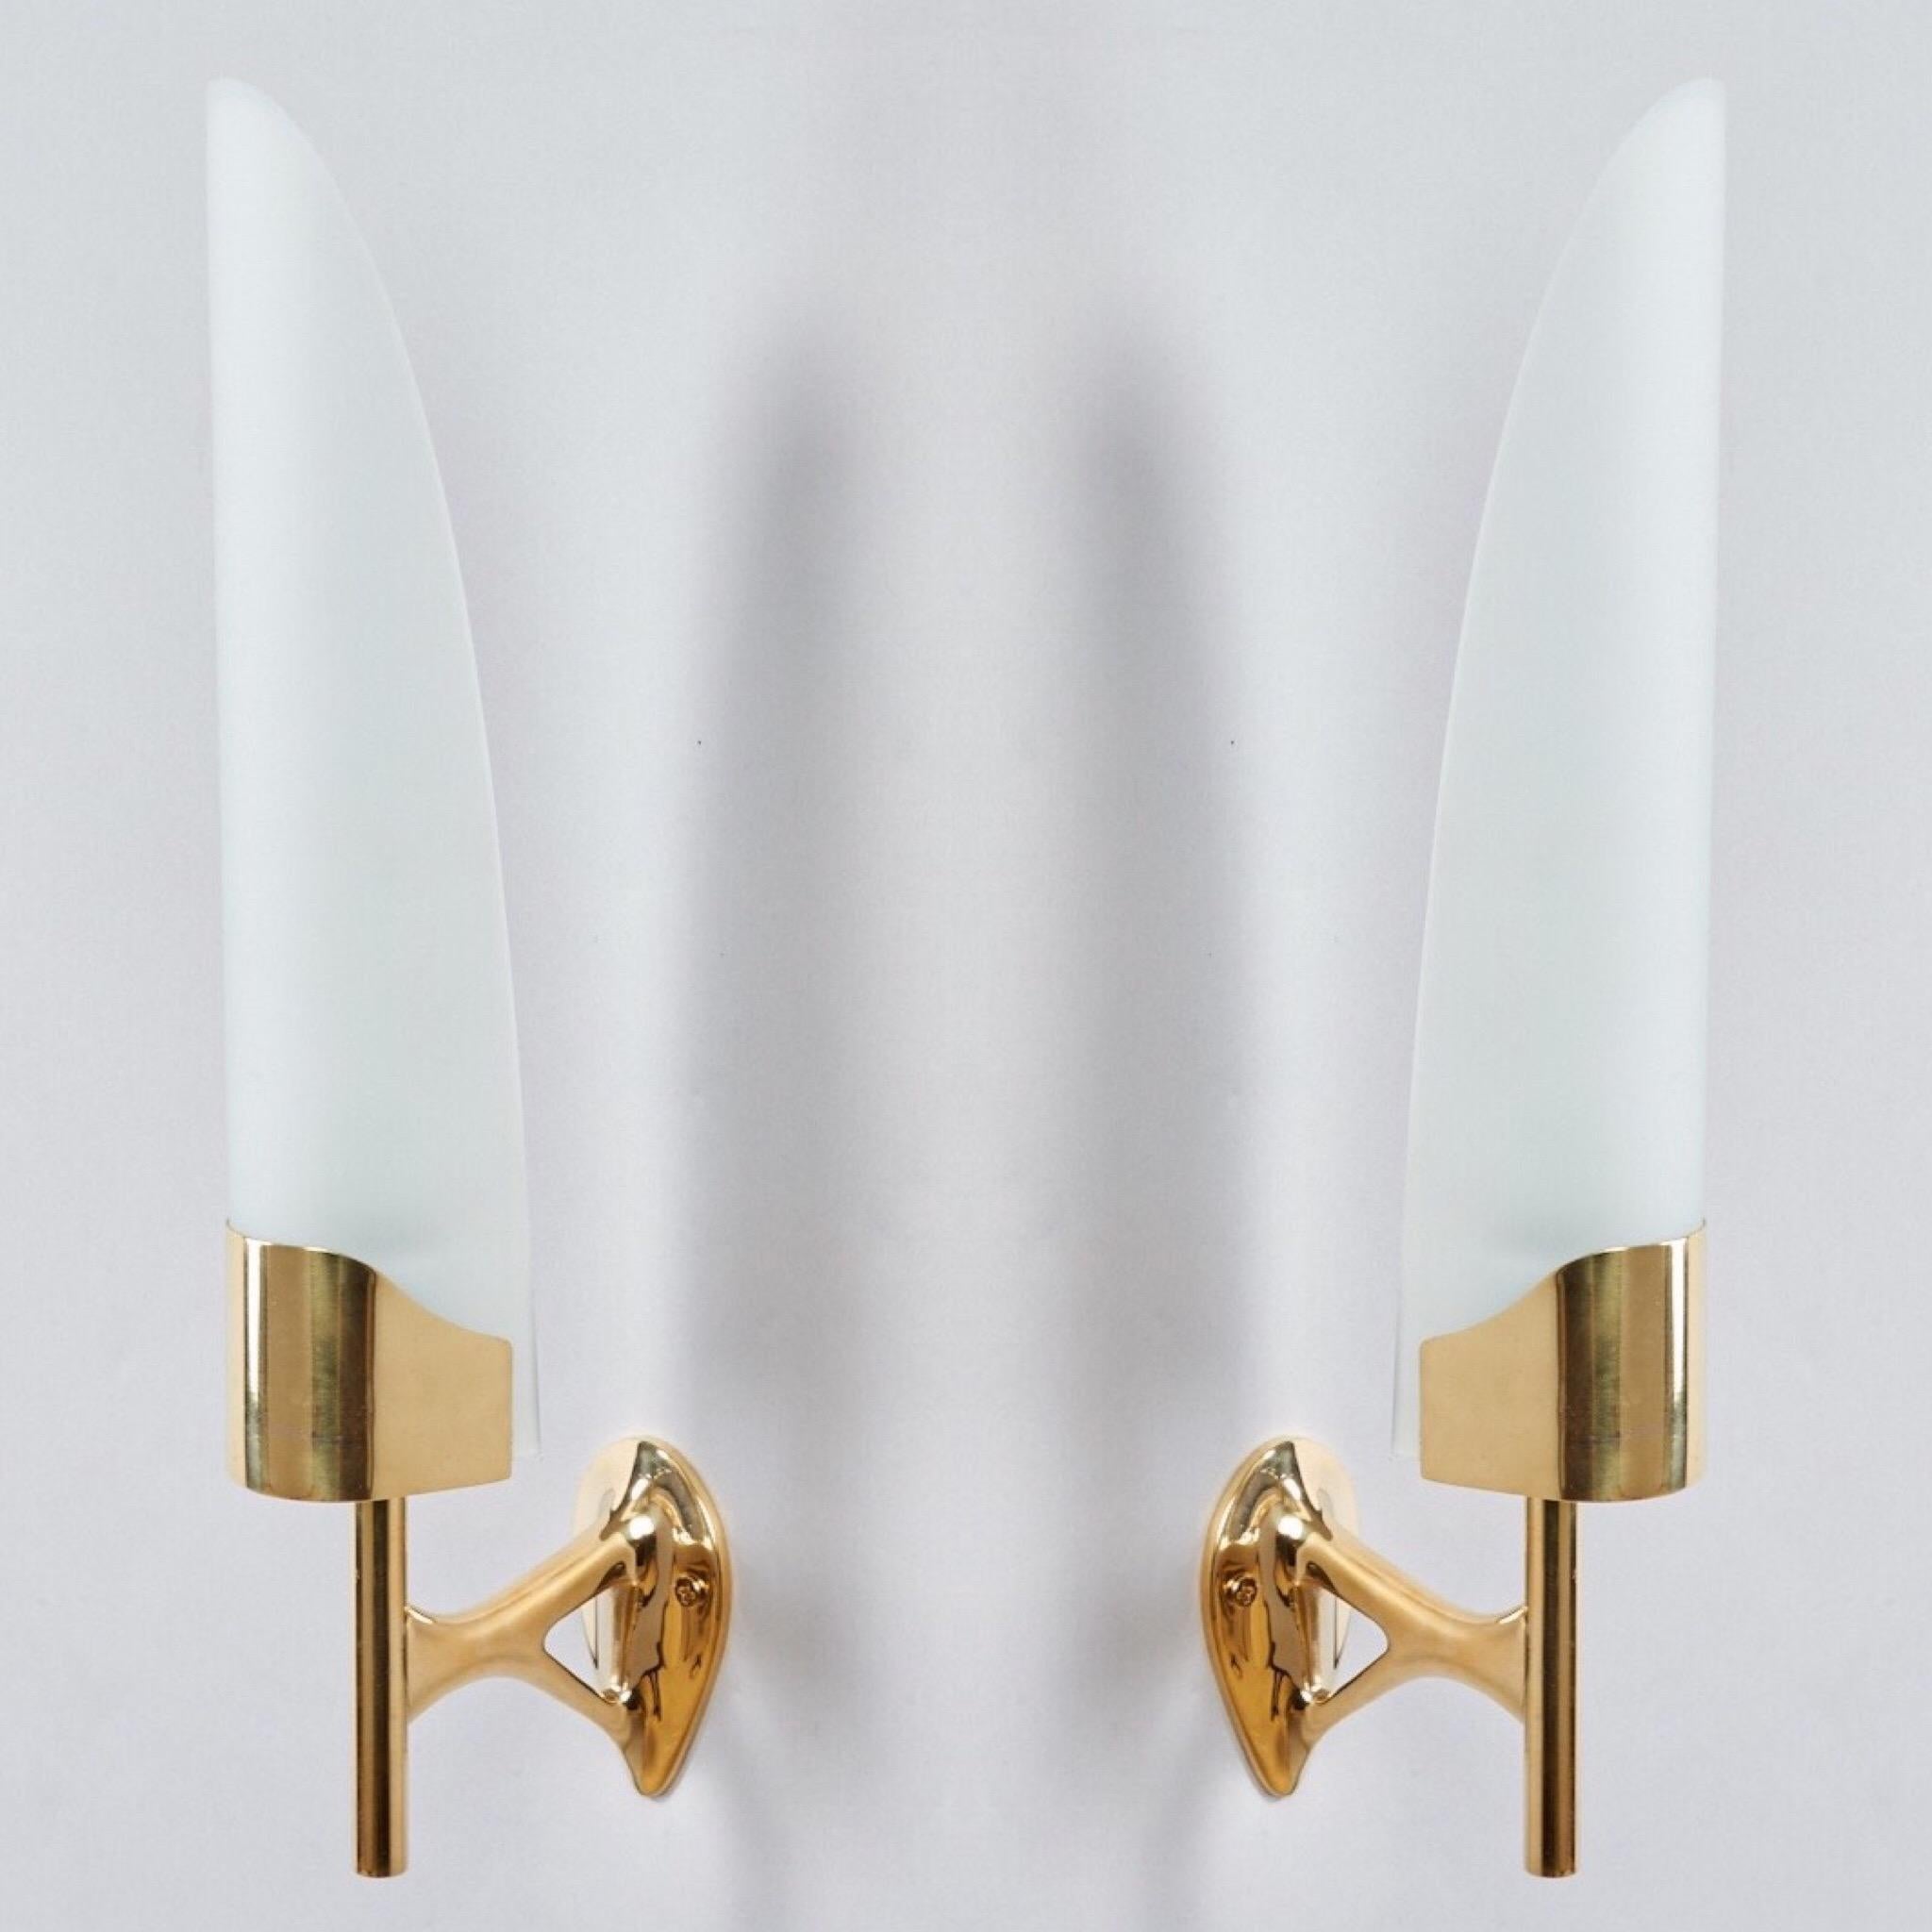 Max Ingrand (1908-1969) 

A beautiful pair of long, curved frosted glass sconces on sculptural projecting mounts with elegant keyhole detail, in polished brass, by Max Ingrand for Fontana Arte. 

Italy, 1950's. 

Measures: 16